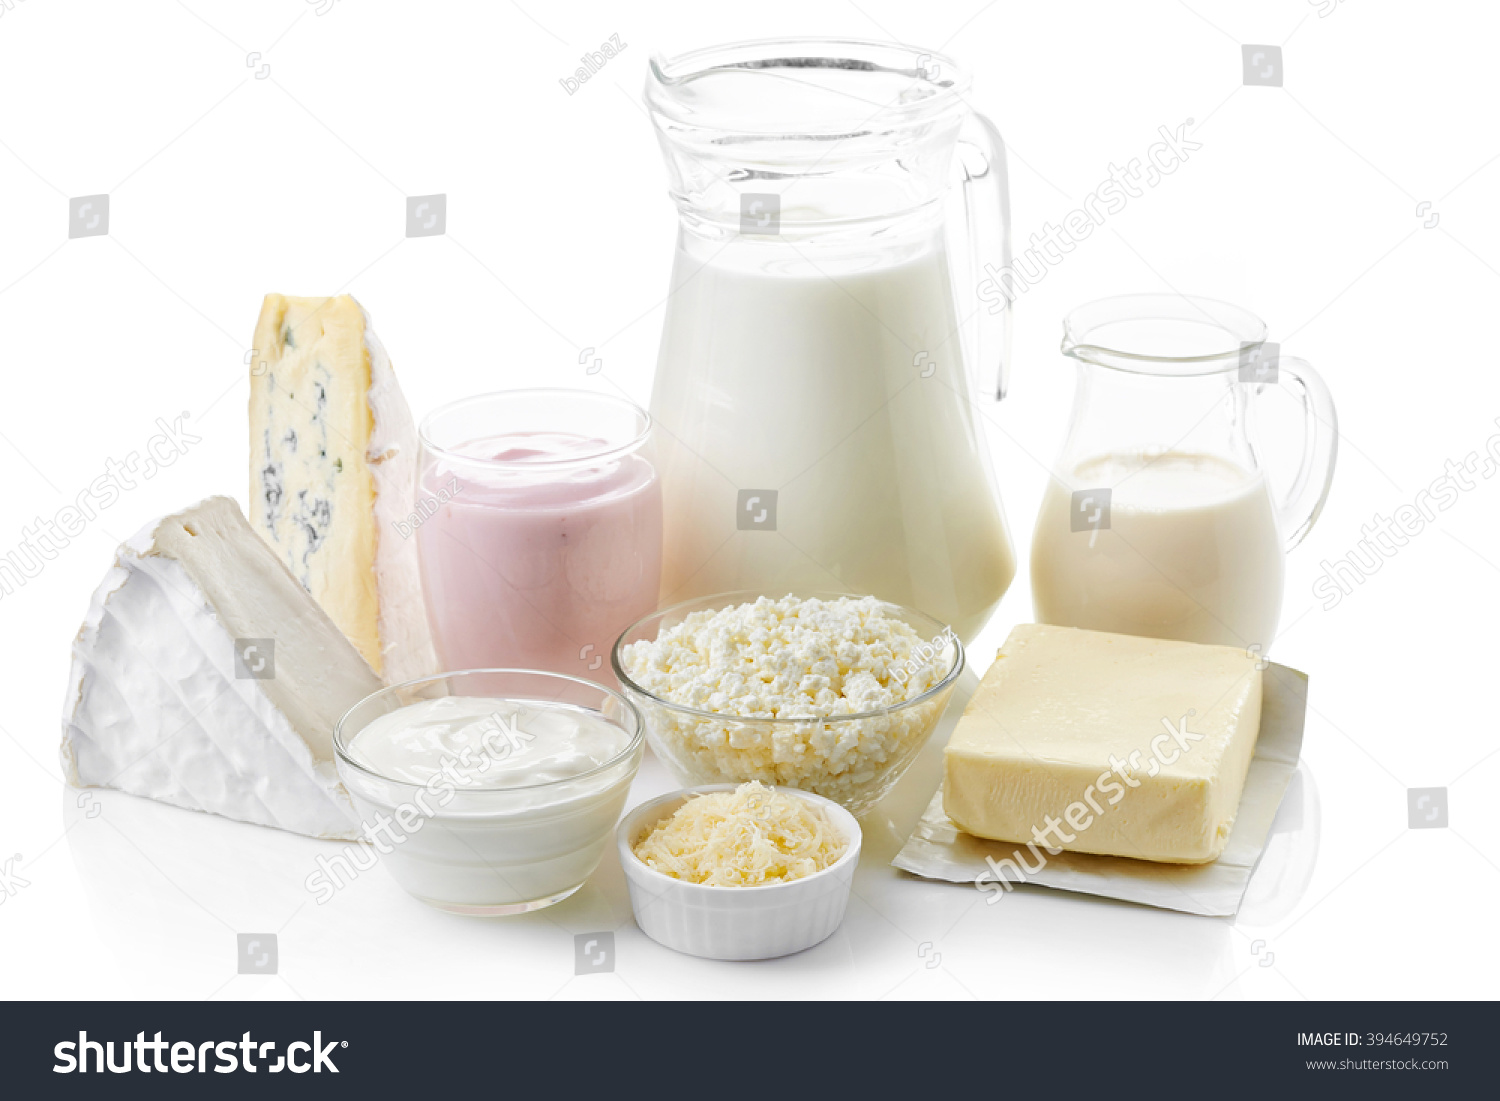 Various fresh dairy products isolated on white background #394649752